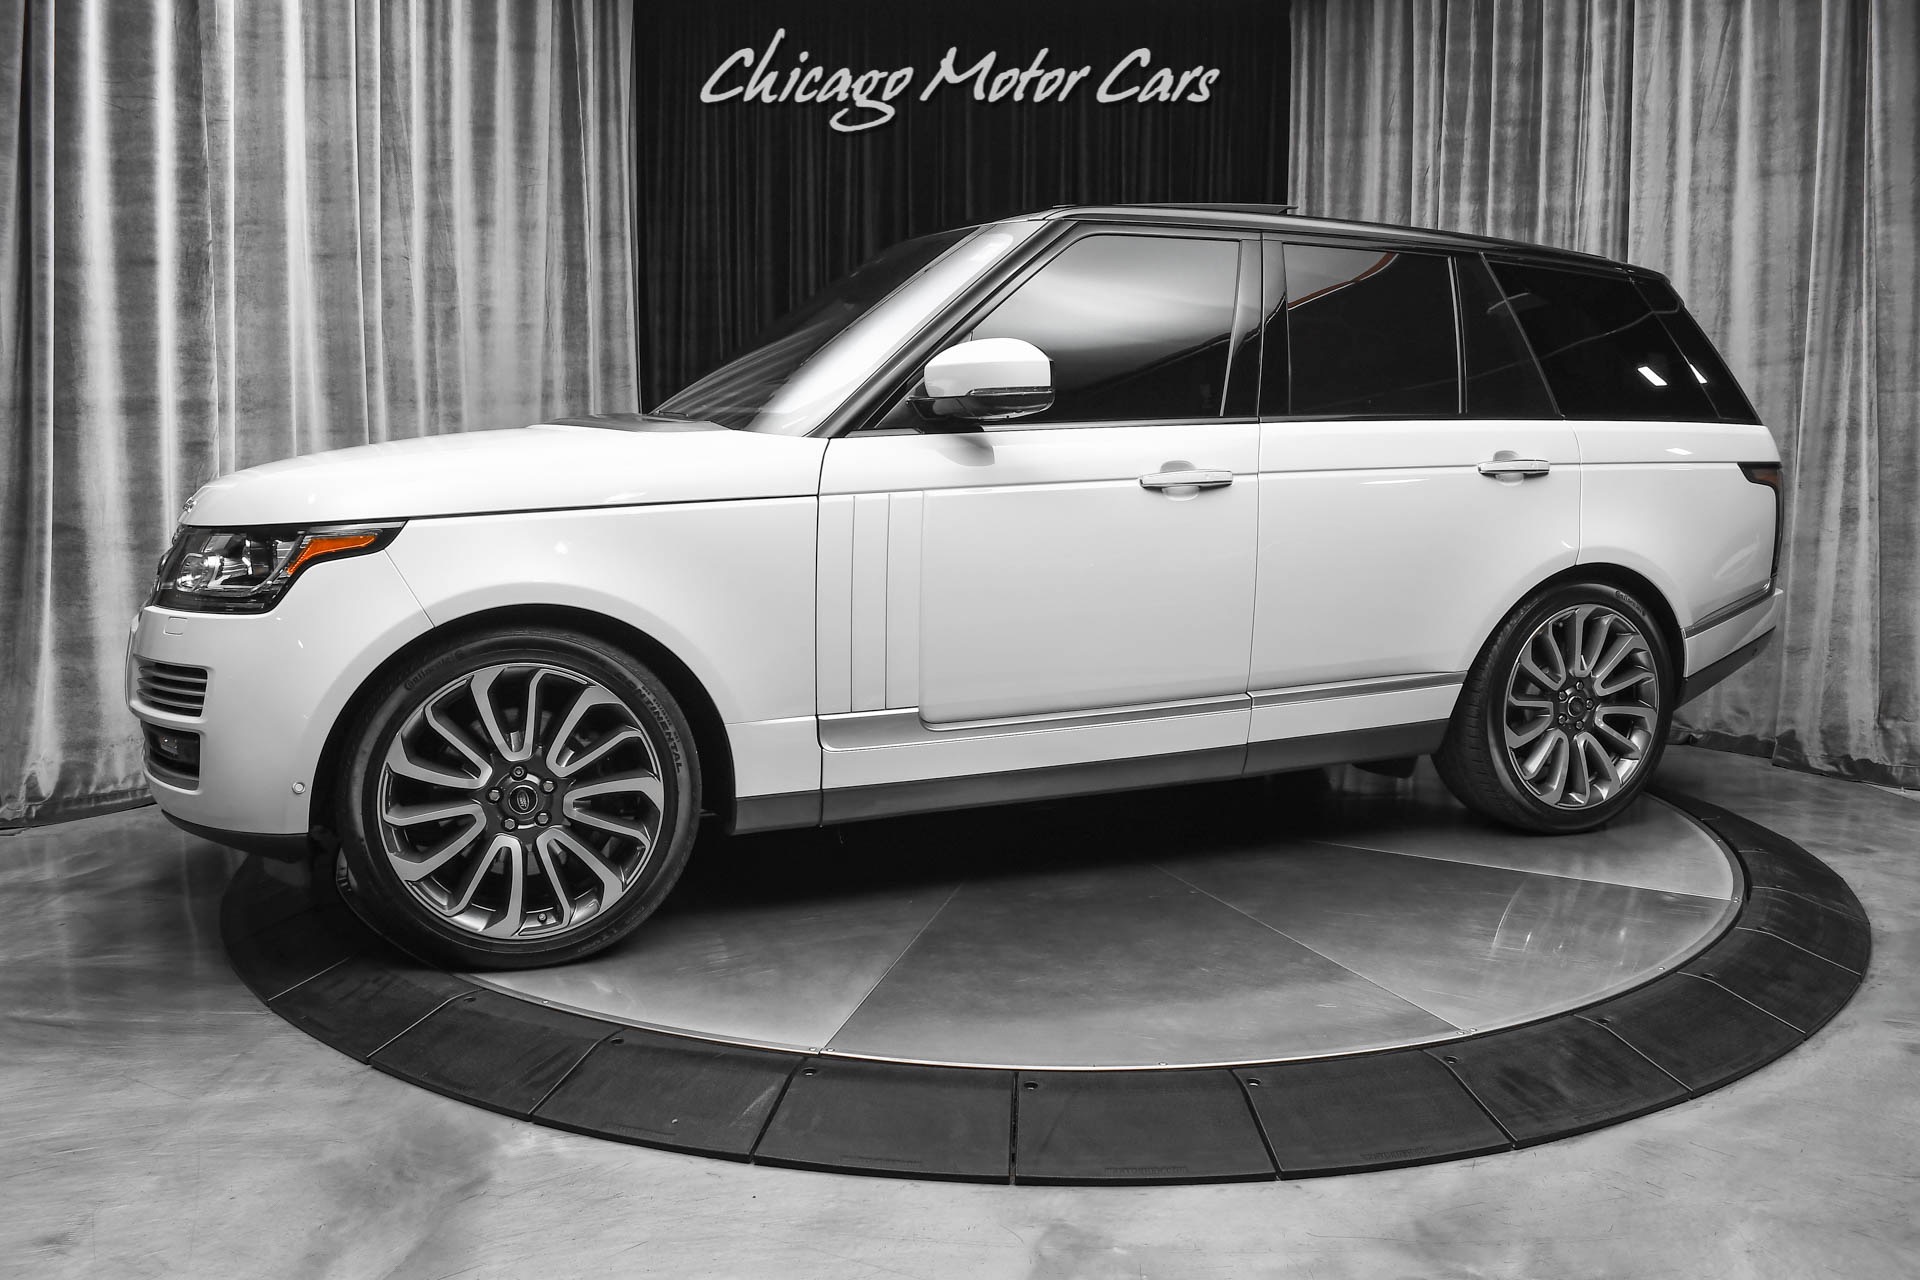 Used-2017-Land-Rover-Range-Rover-Autobiography-SUV-Yulong-Pearl-White-Red-Interior-Loaded